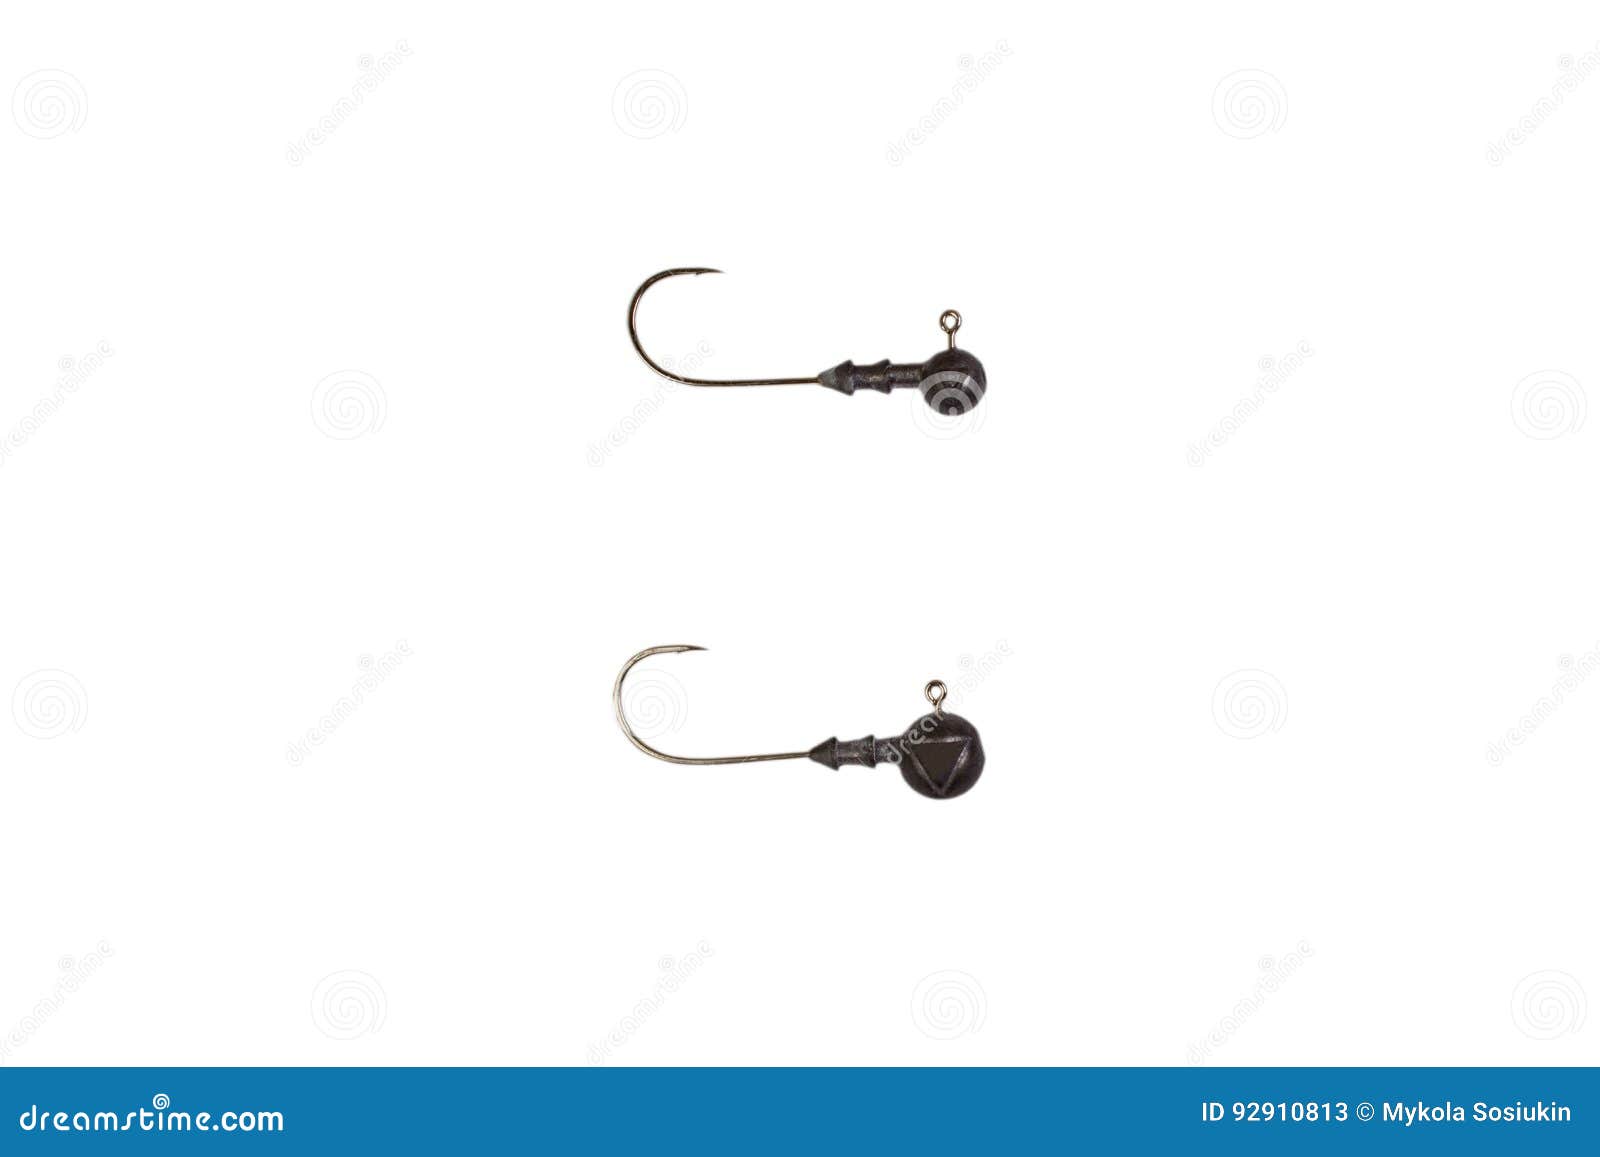 1,443 Vintage Fishing Tackle Background Stock Photos - Free